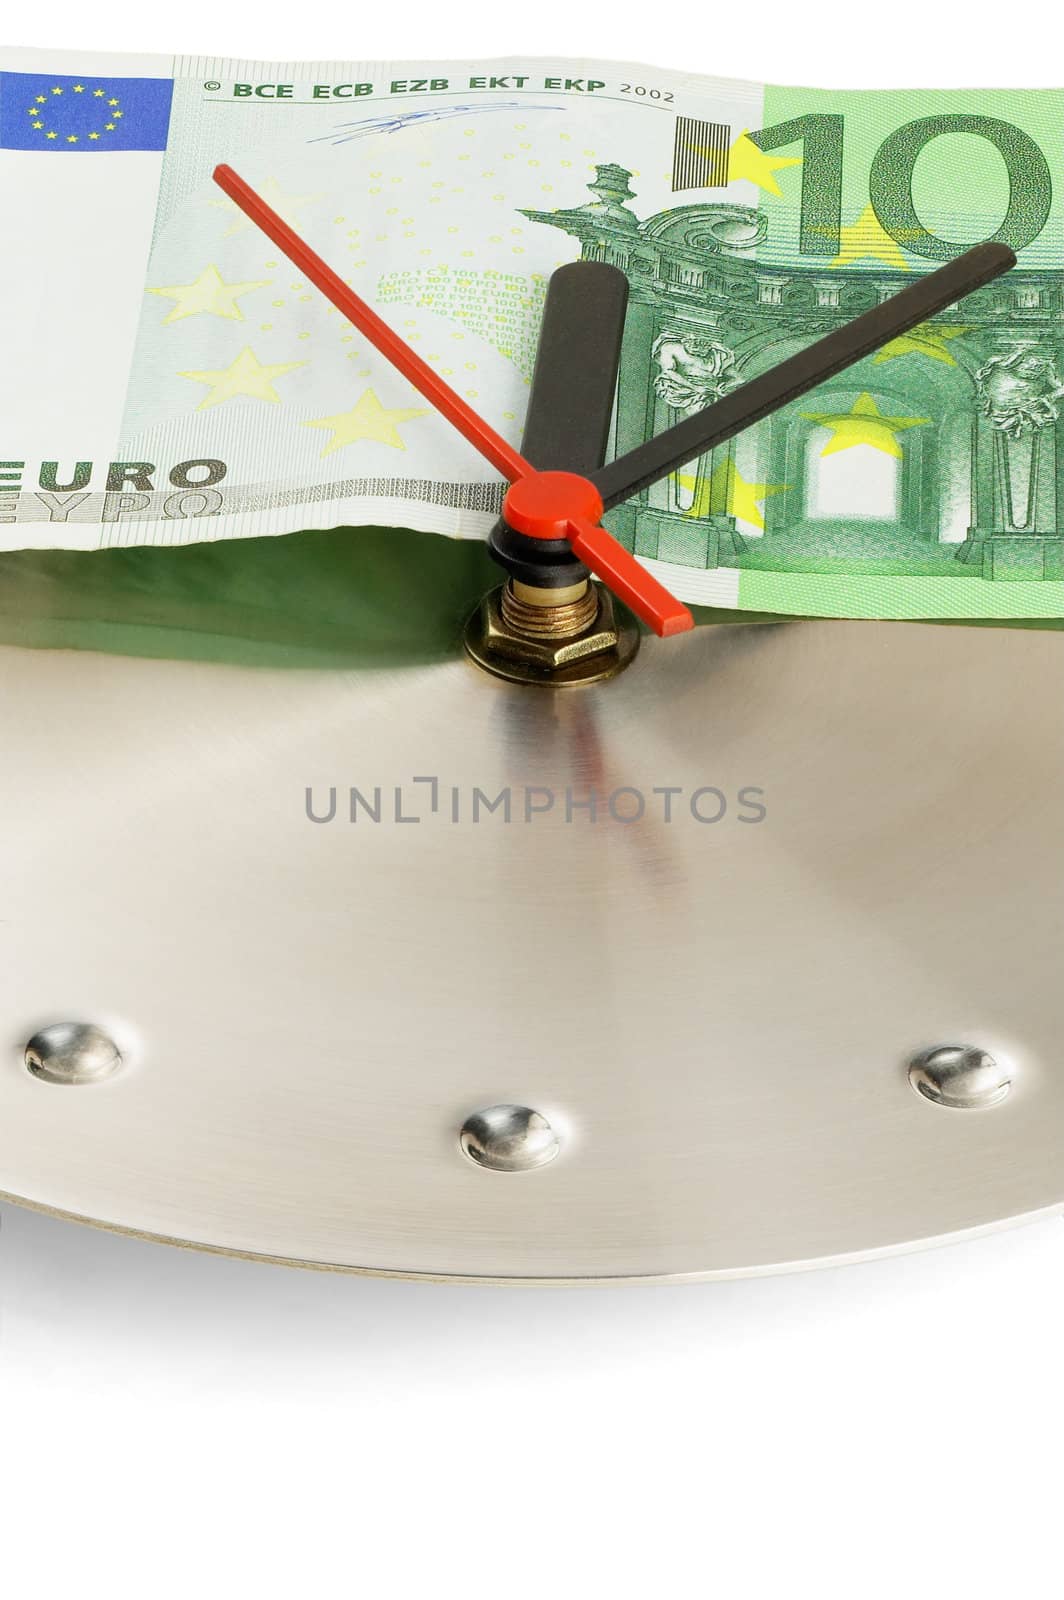 euro bill on a metal wall clock on white background